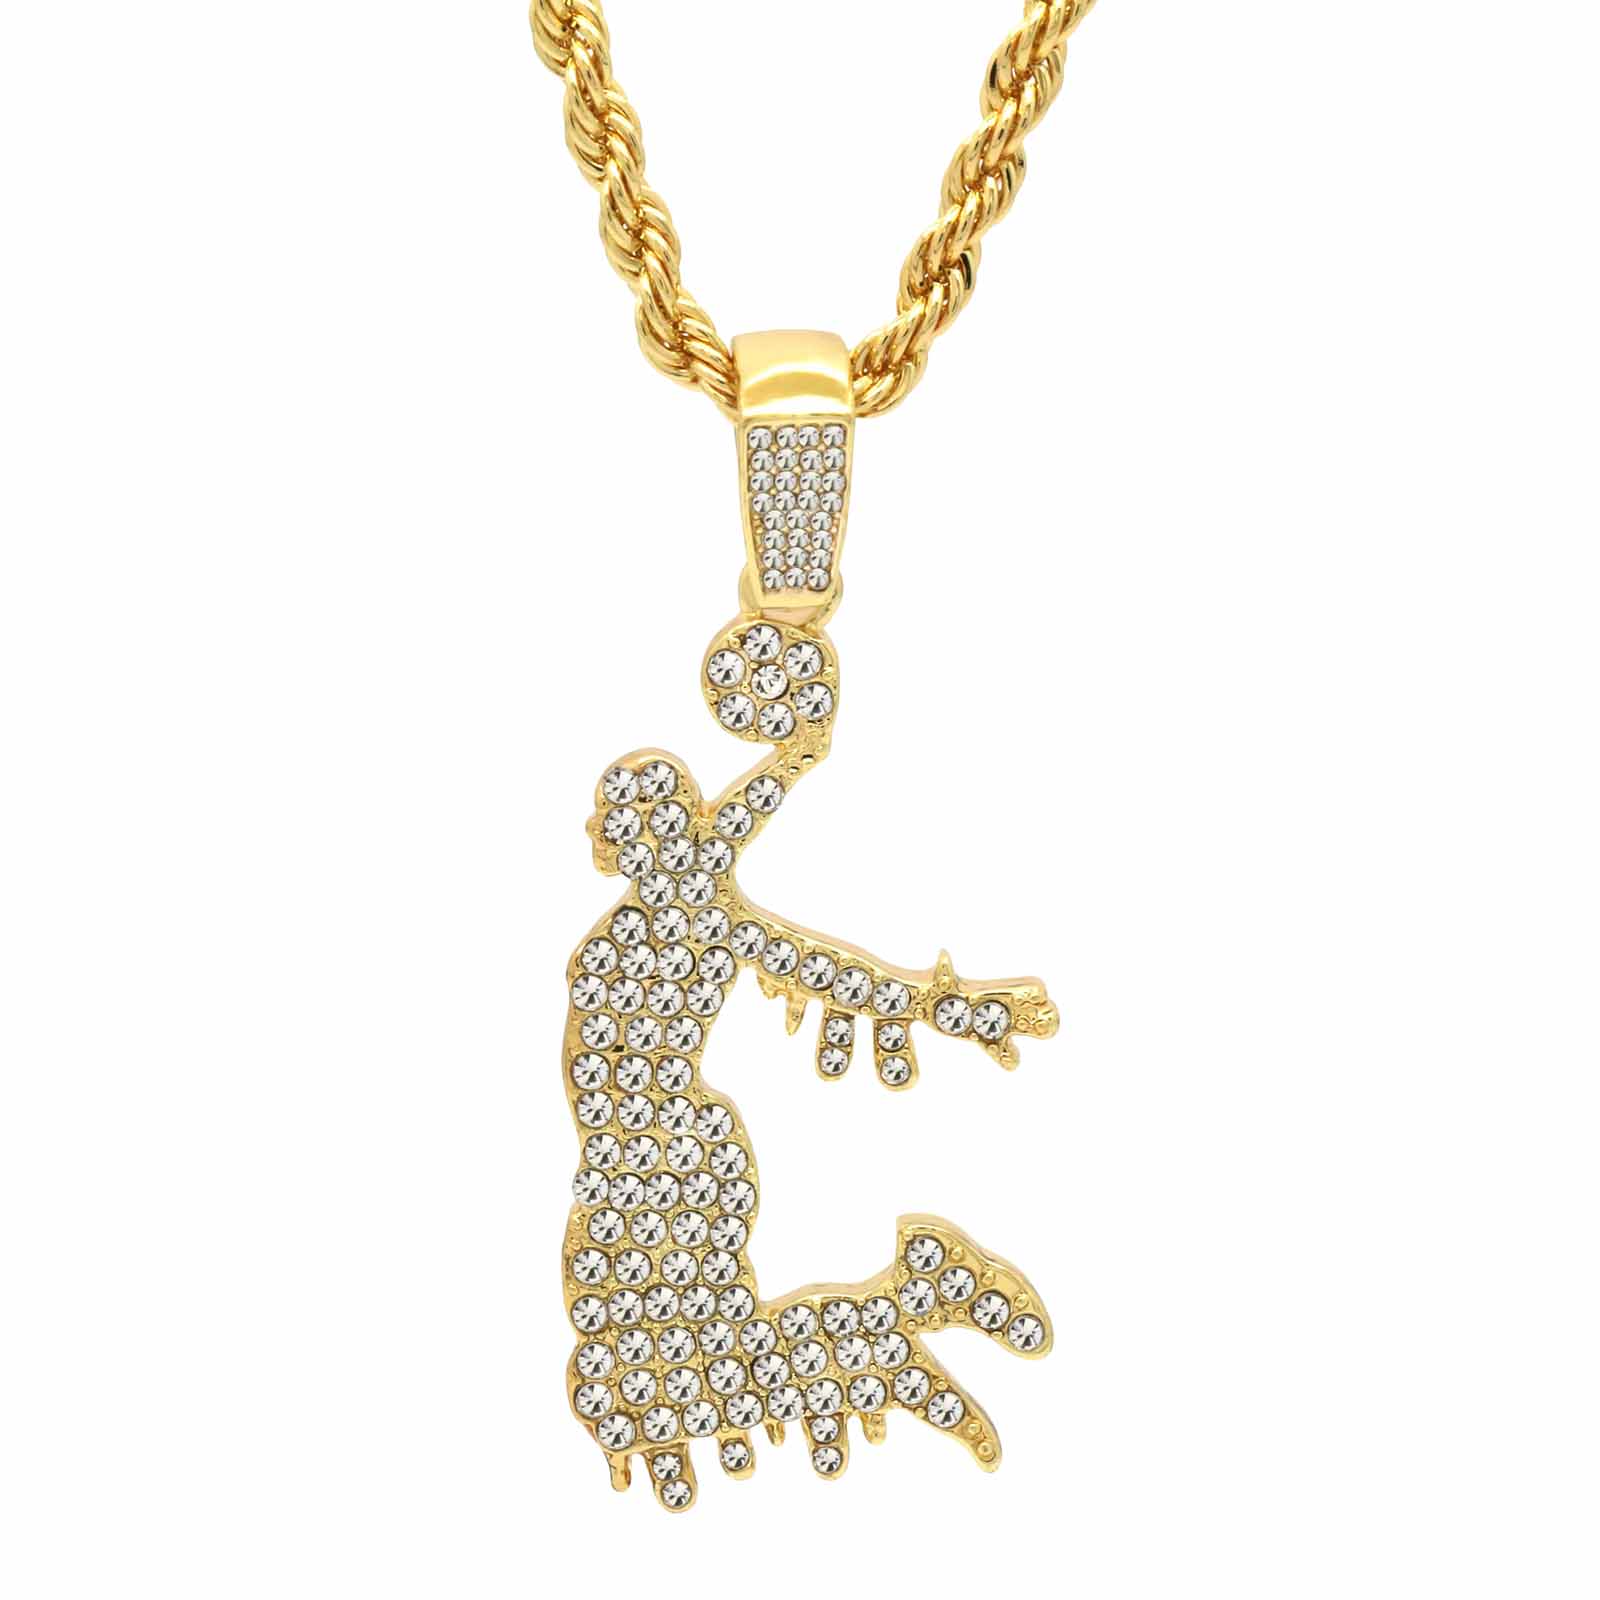 JUMPMAN BASKETBALL PENDANT WITH GOLD ROPE CHAIN